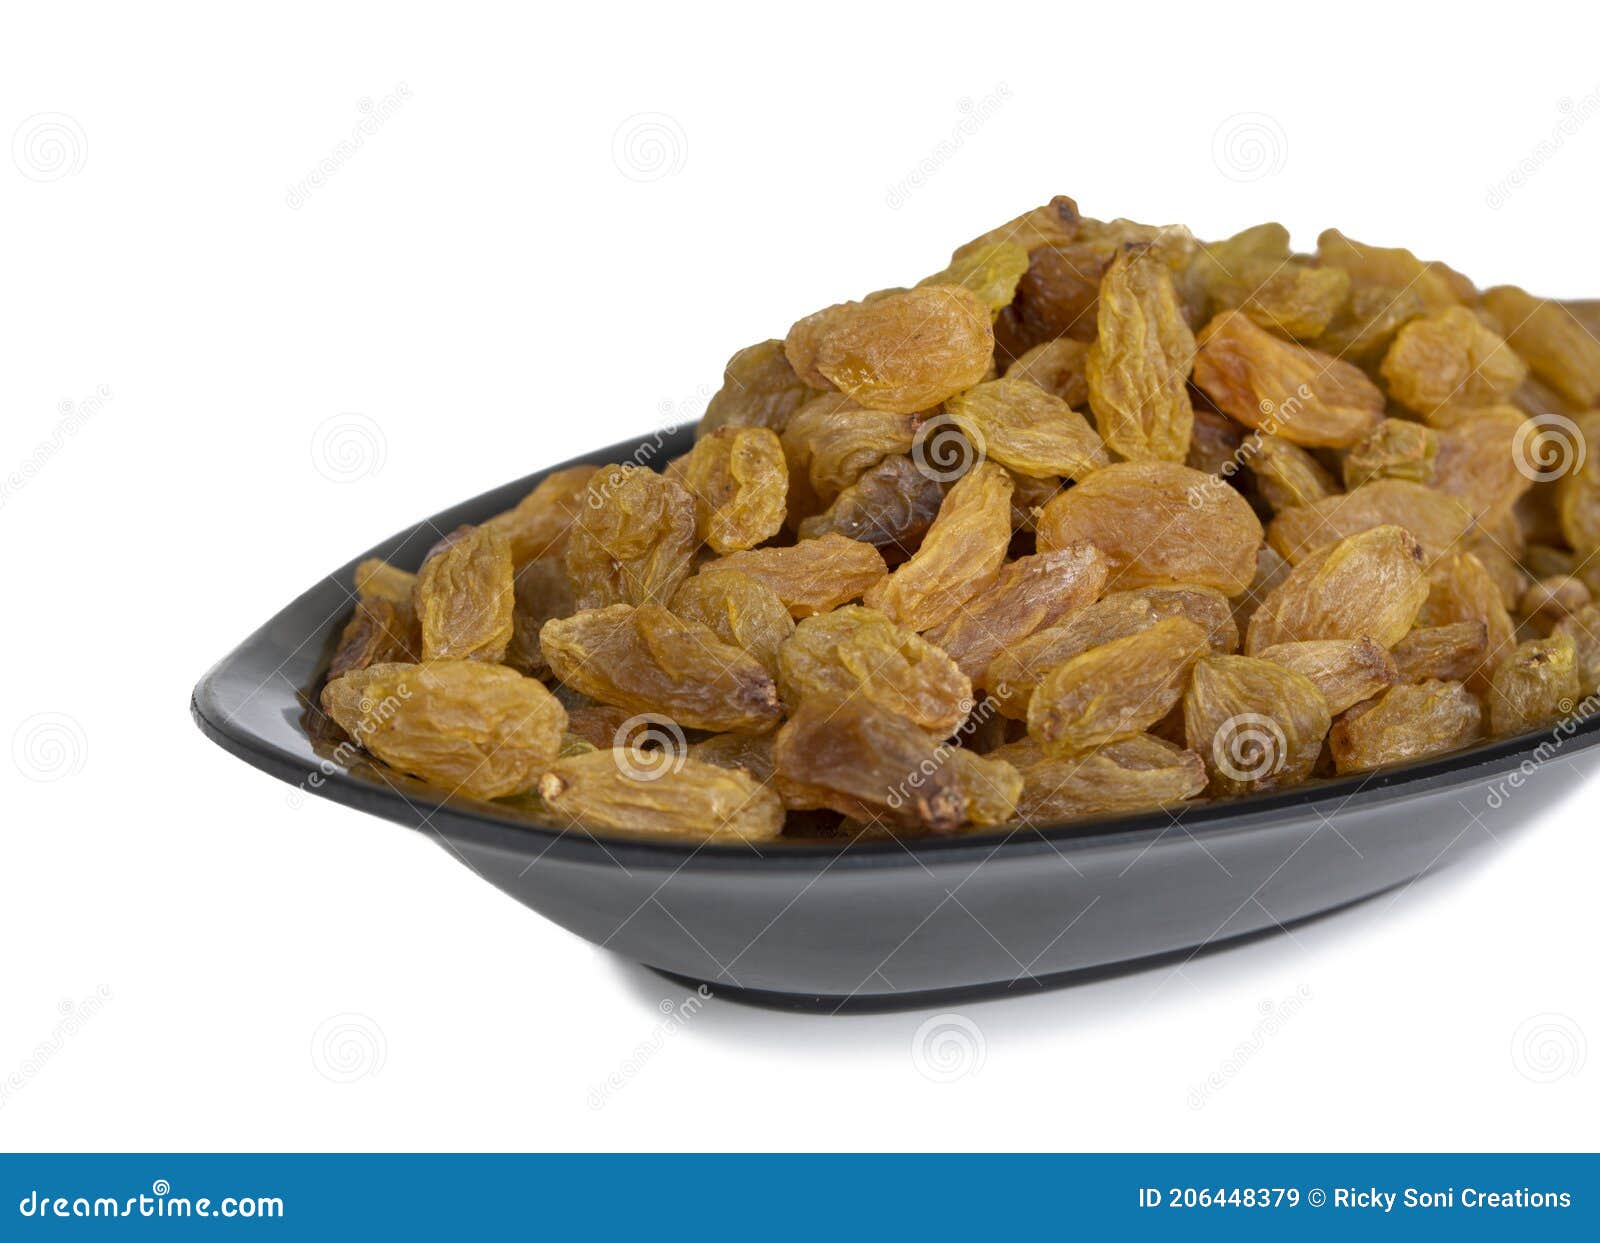 Healthy Sweet Golden Raisins or Dried Grapes Stock Image - Image of ...